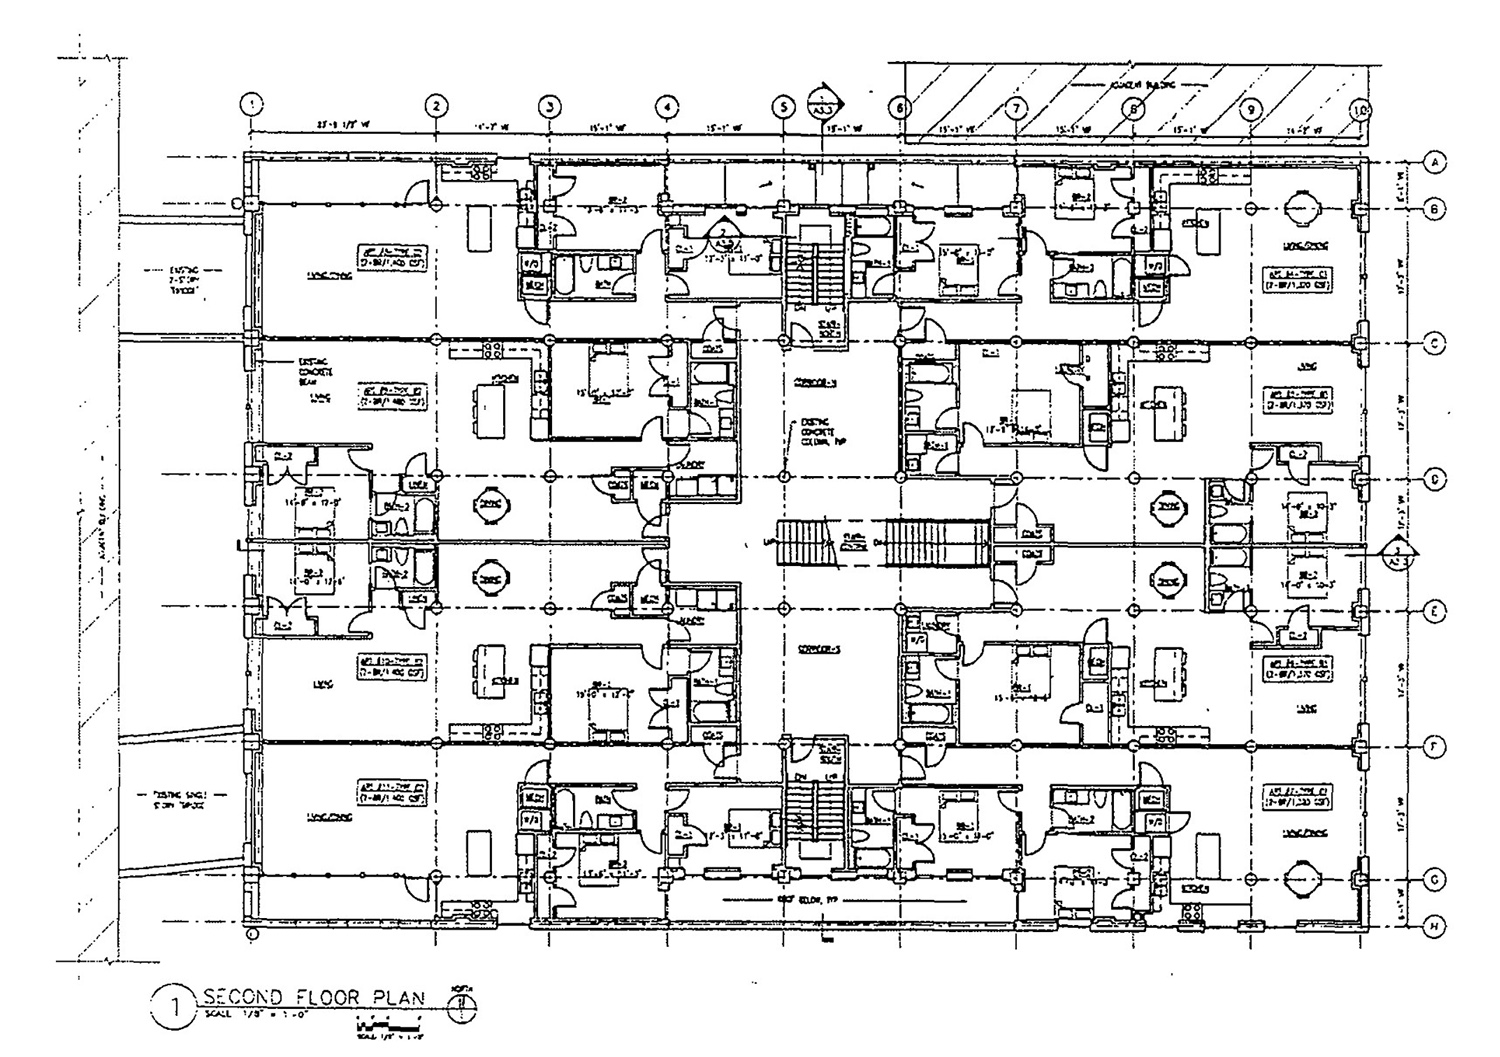 Second Floor Plan for 4046 N Hermitage Avenue. Drawing by Foster Dale Architects